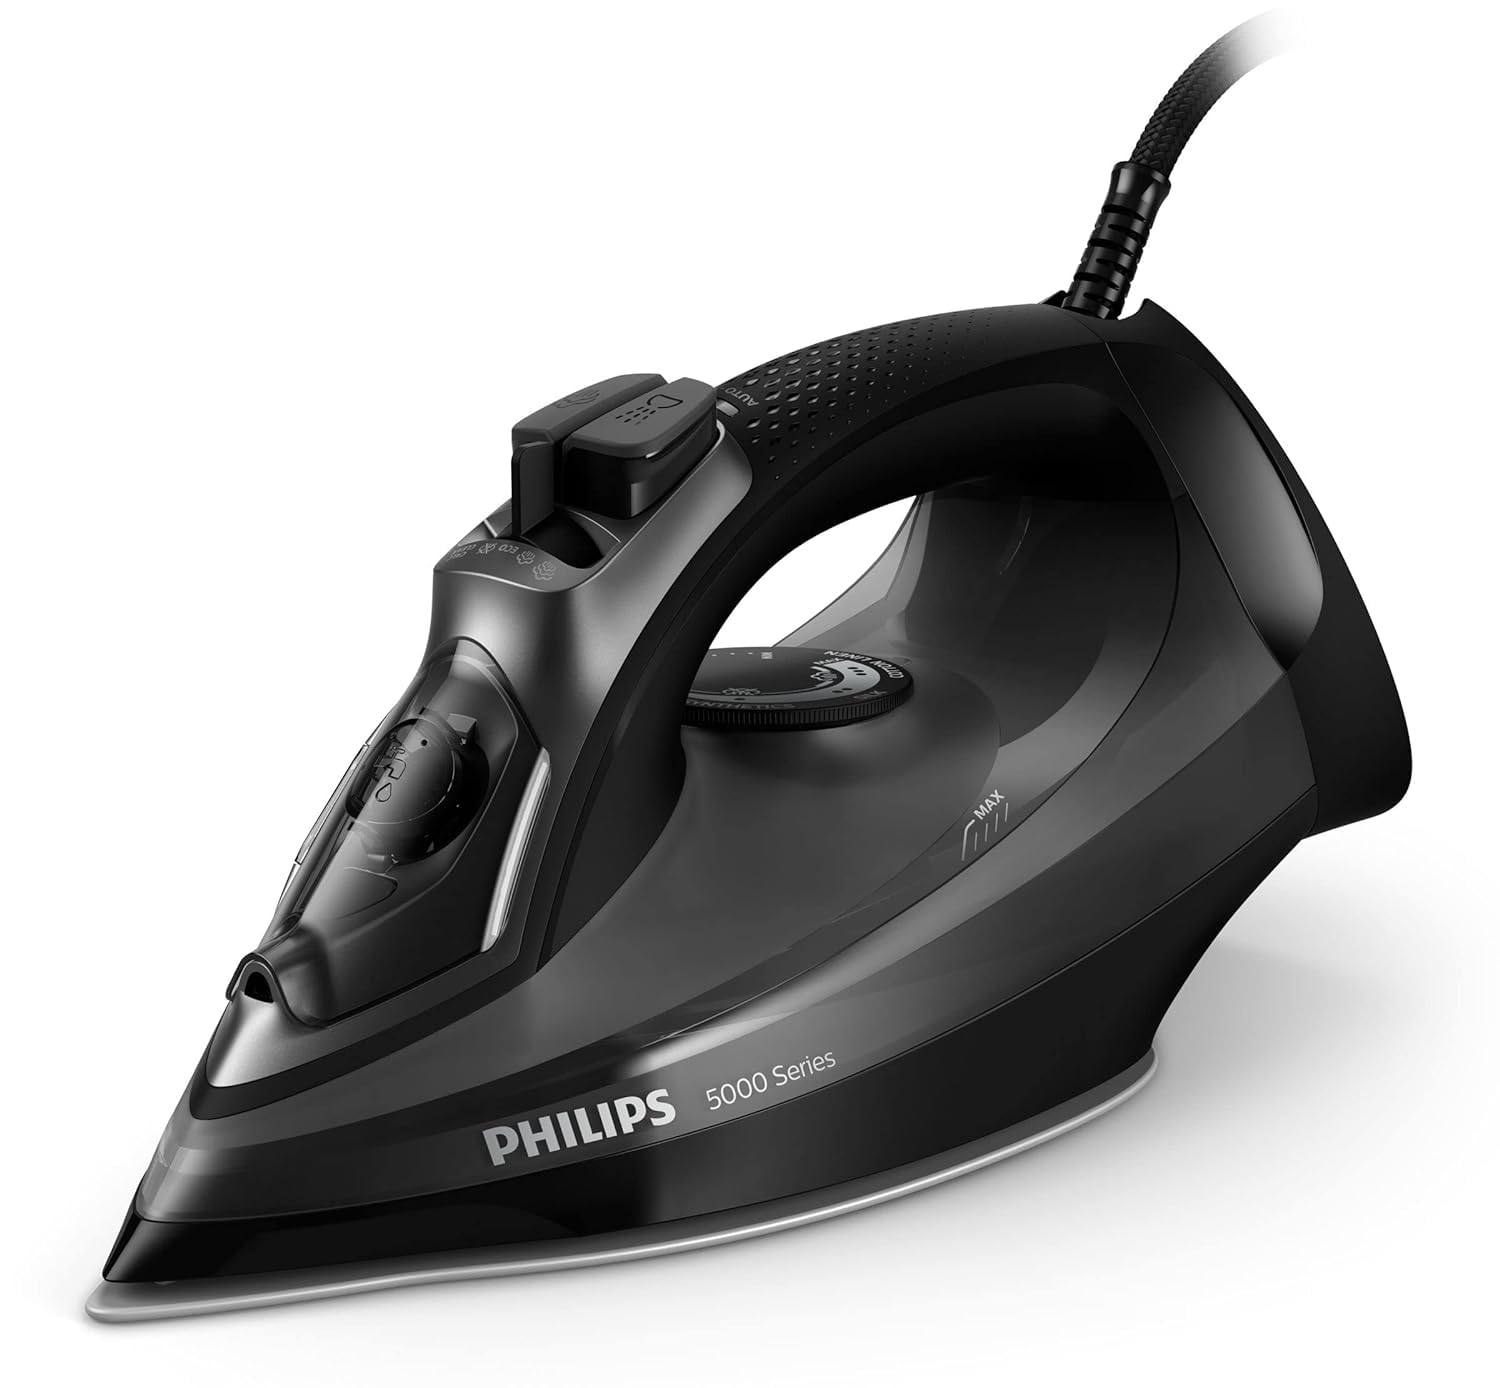 PHILIPS Steam Iron - Continuous Steam Flow of 45 Grams per minute and 200 g/min 2600W - 320ml - 50/60Hz - 5000 Series DST5040/86